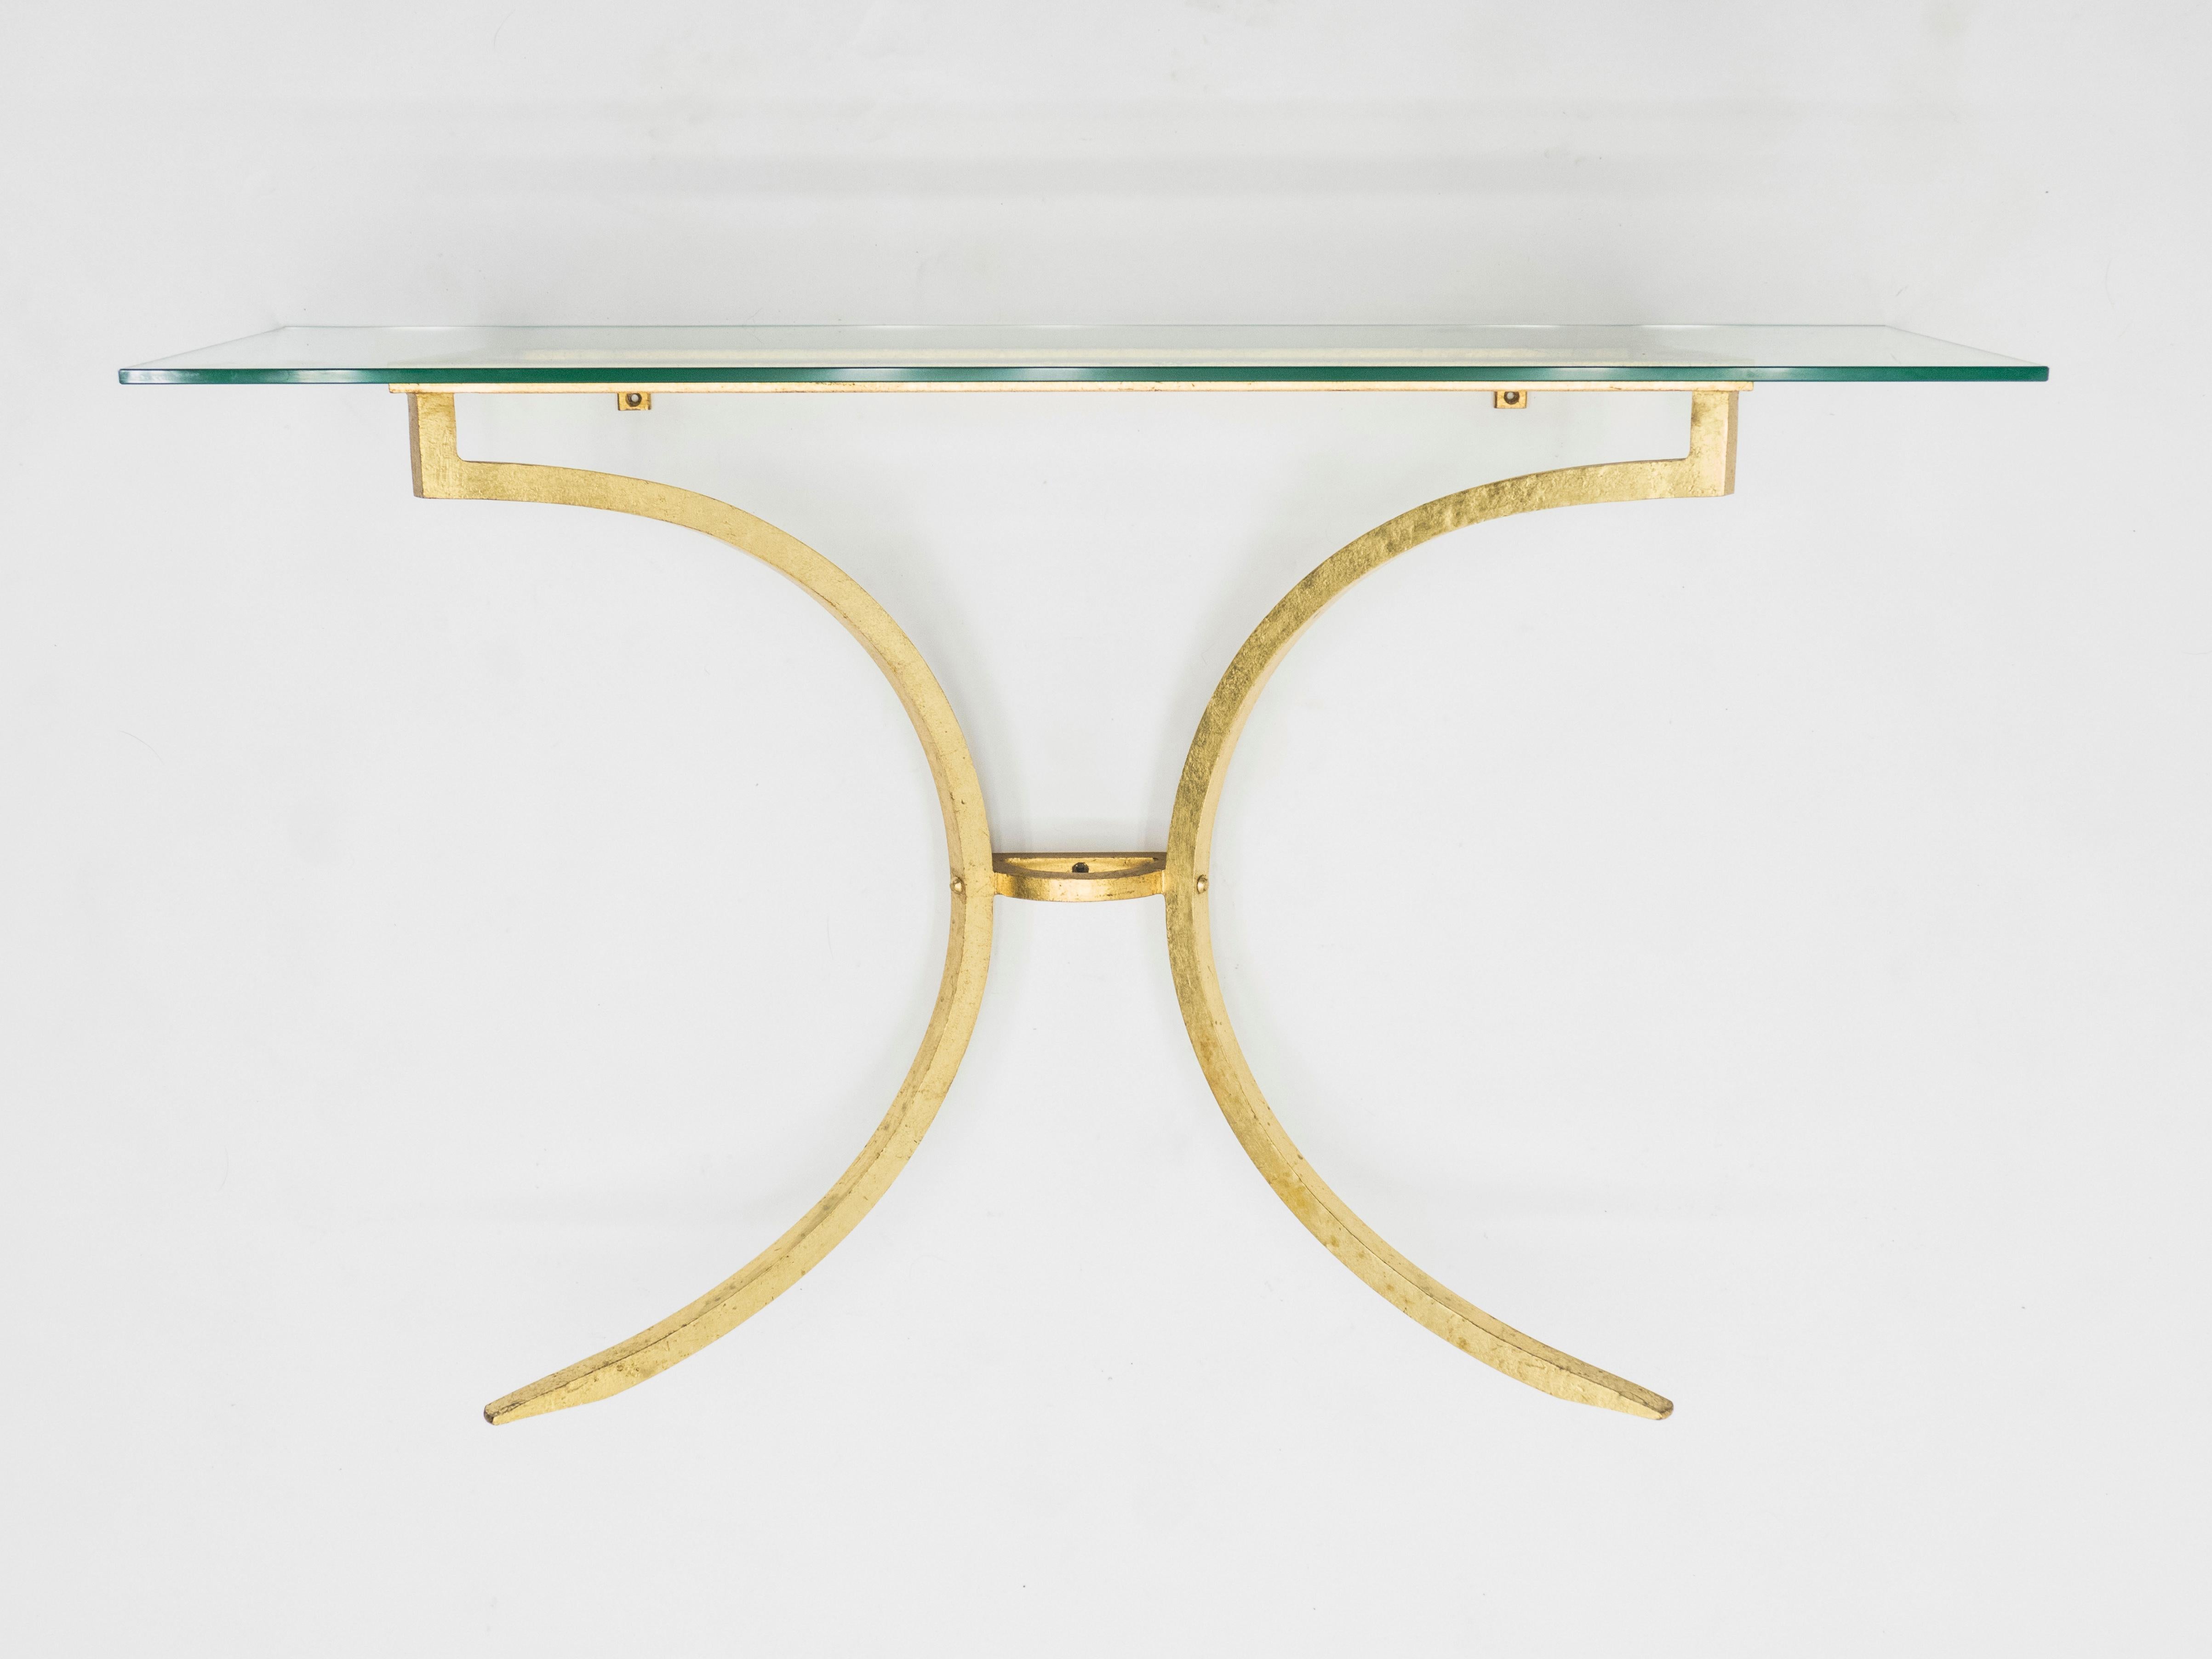 Rare Roger Thibier Gilt Wrought Iron Gold Leaf Console Table with Mirror, 1960s For Sale 2